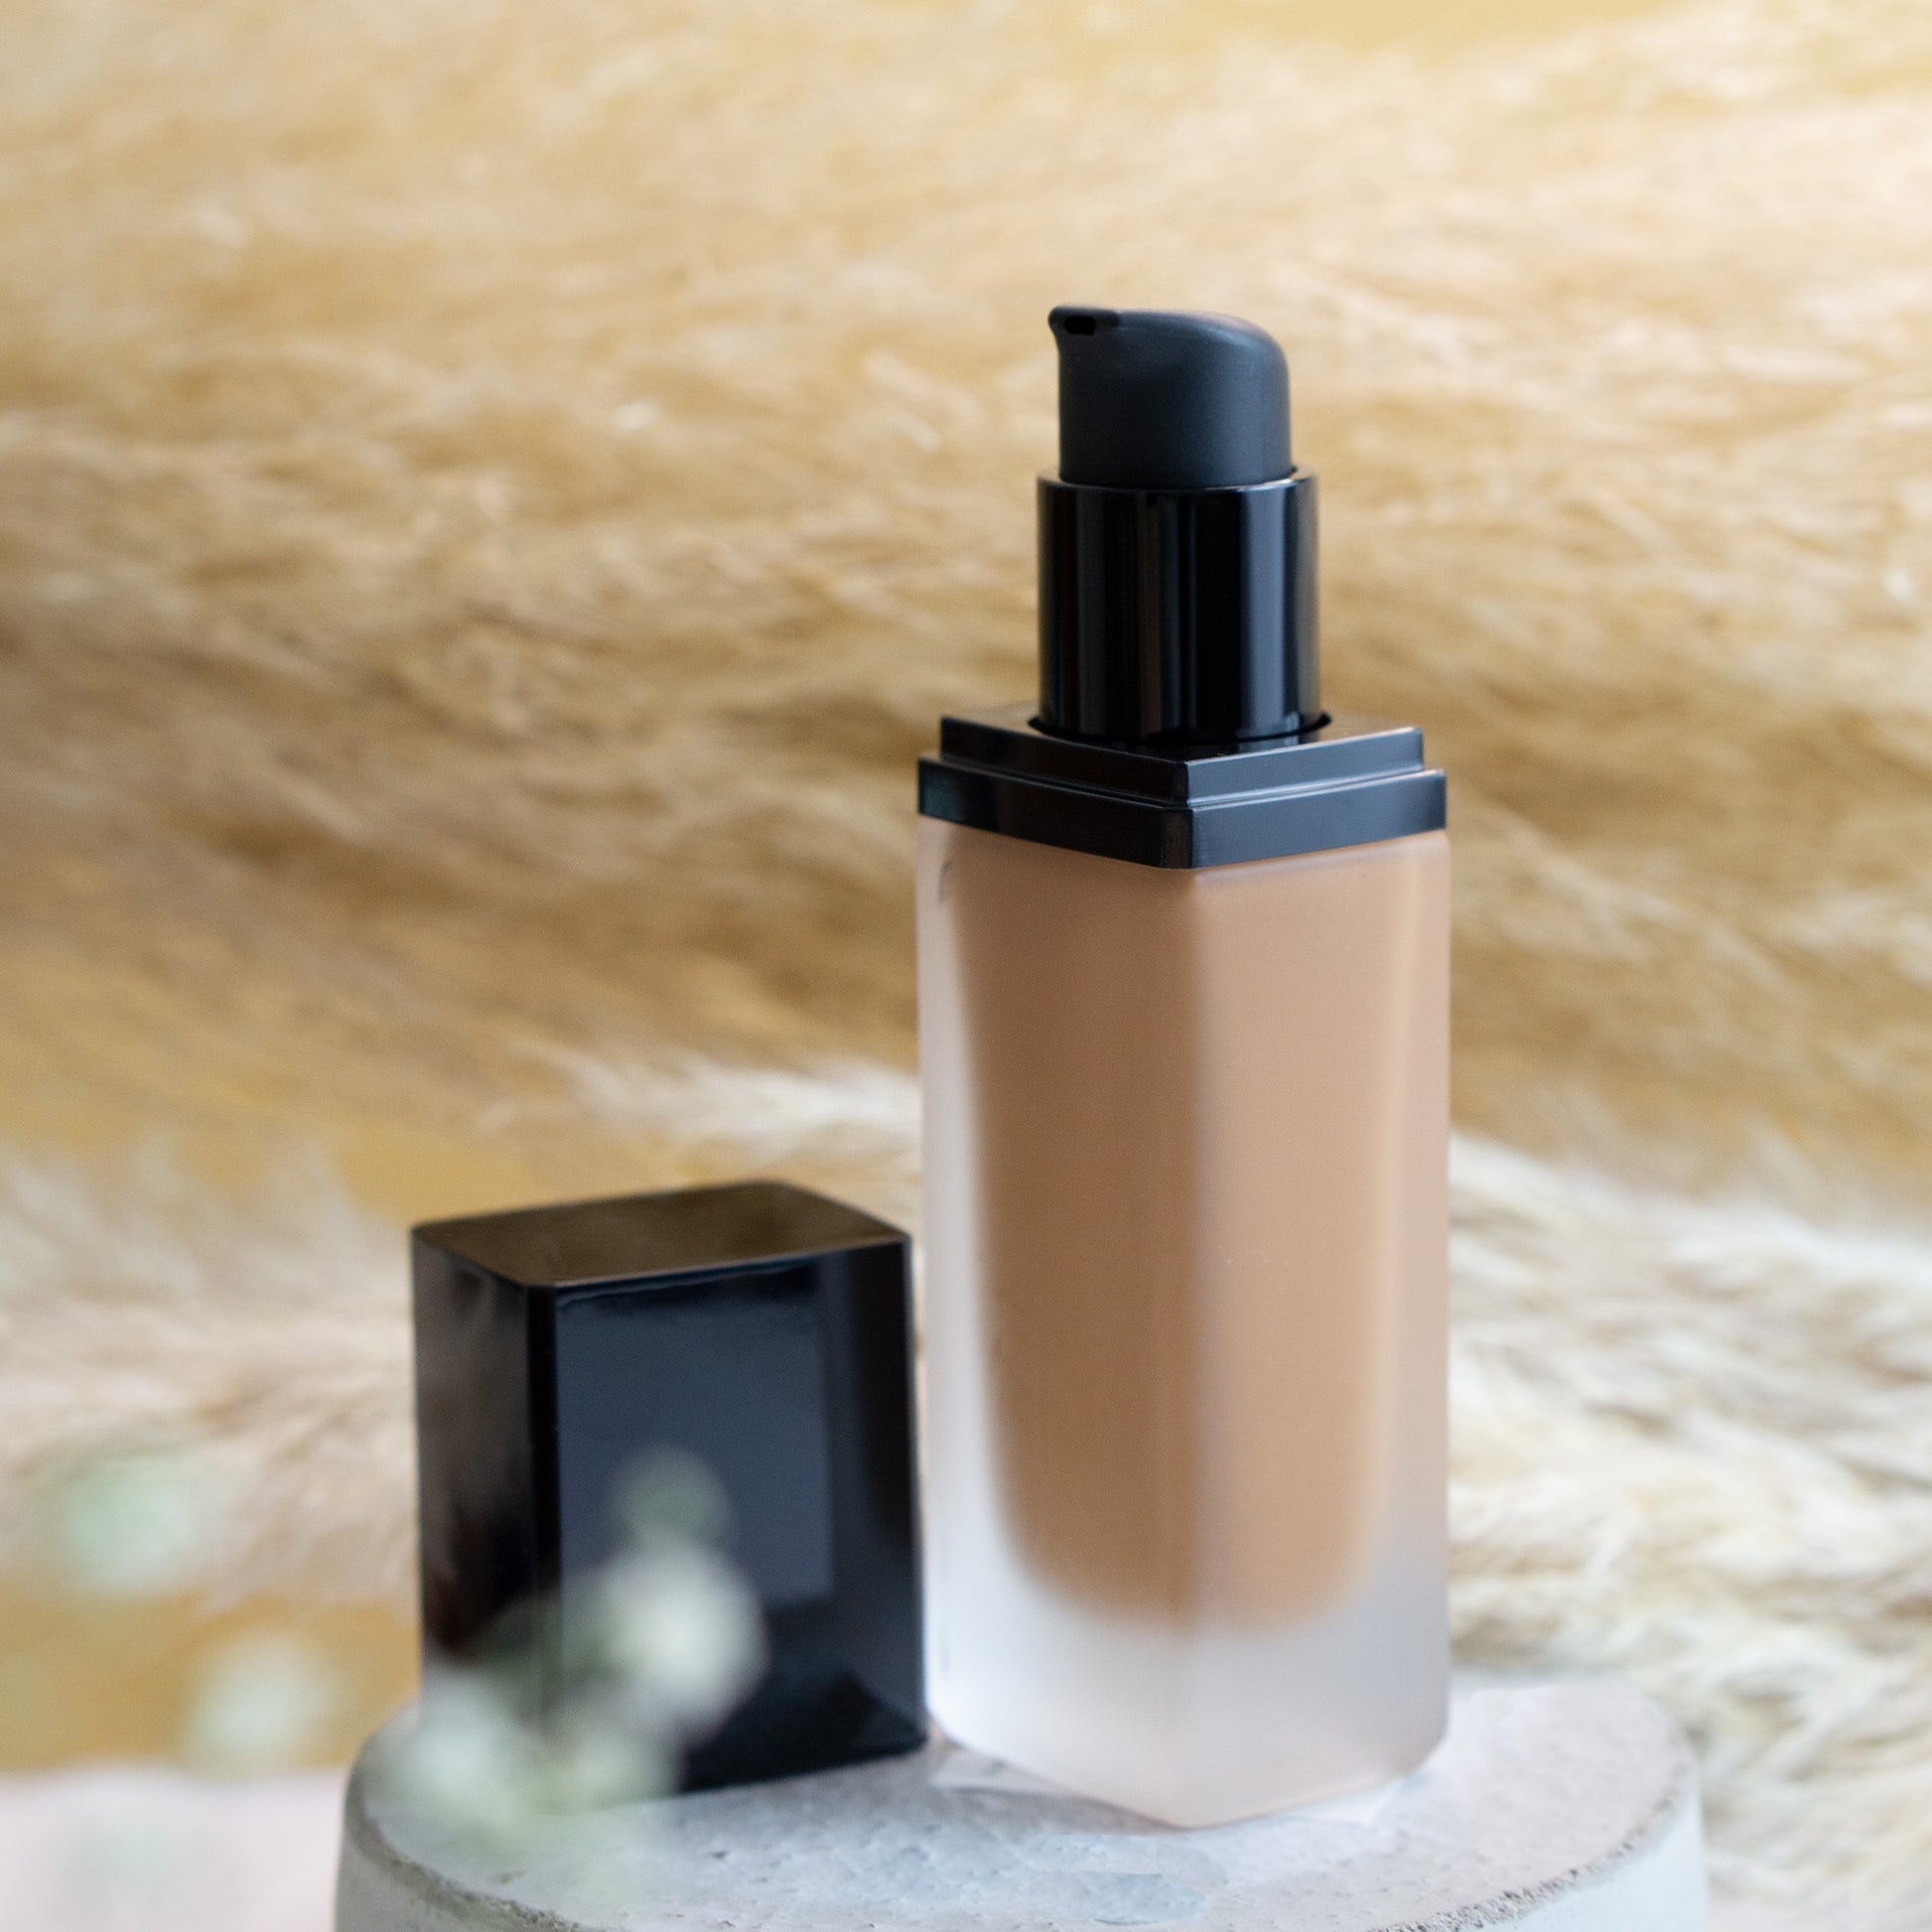 Introducing the Cruisin Organics Marigold Foundation, a revolutionary product that combines the benefits of a foundation and a natural SPF glow. This foundation offers a medium to full buildable coverage, allowing you to customize your desired look effortlessly.